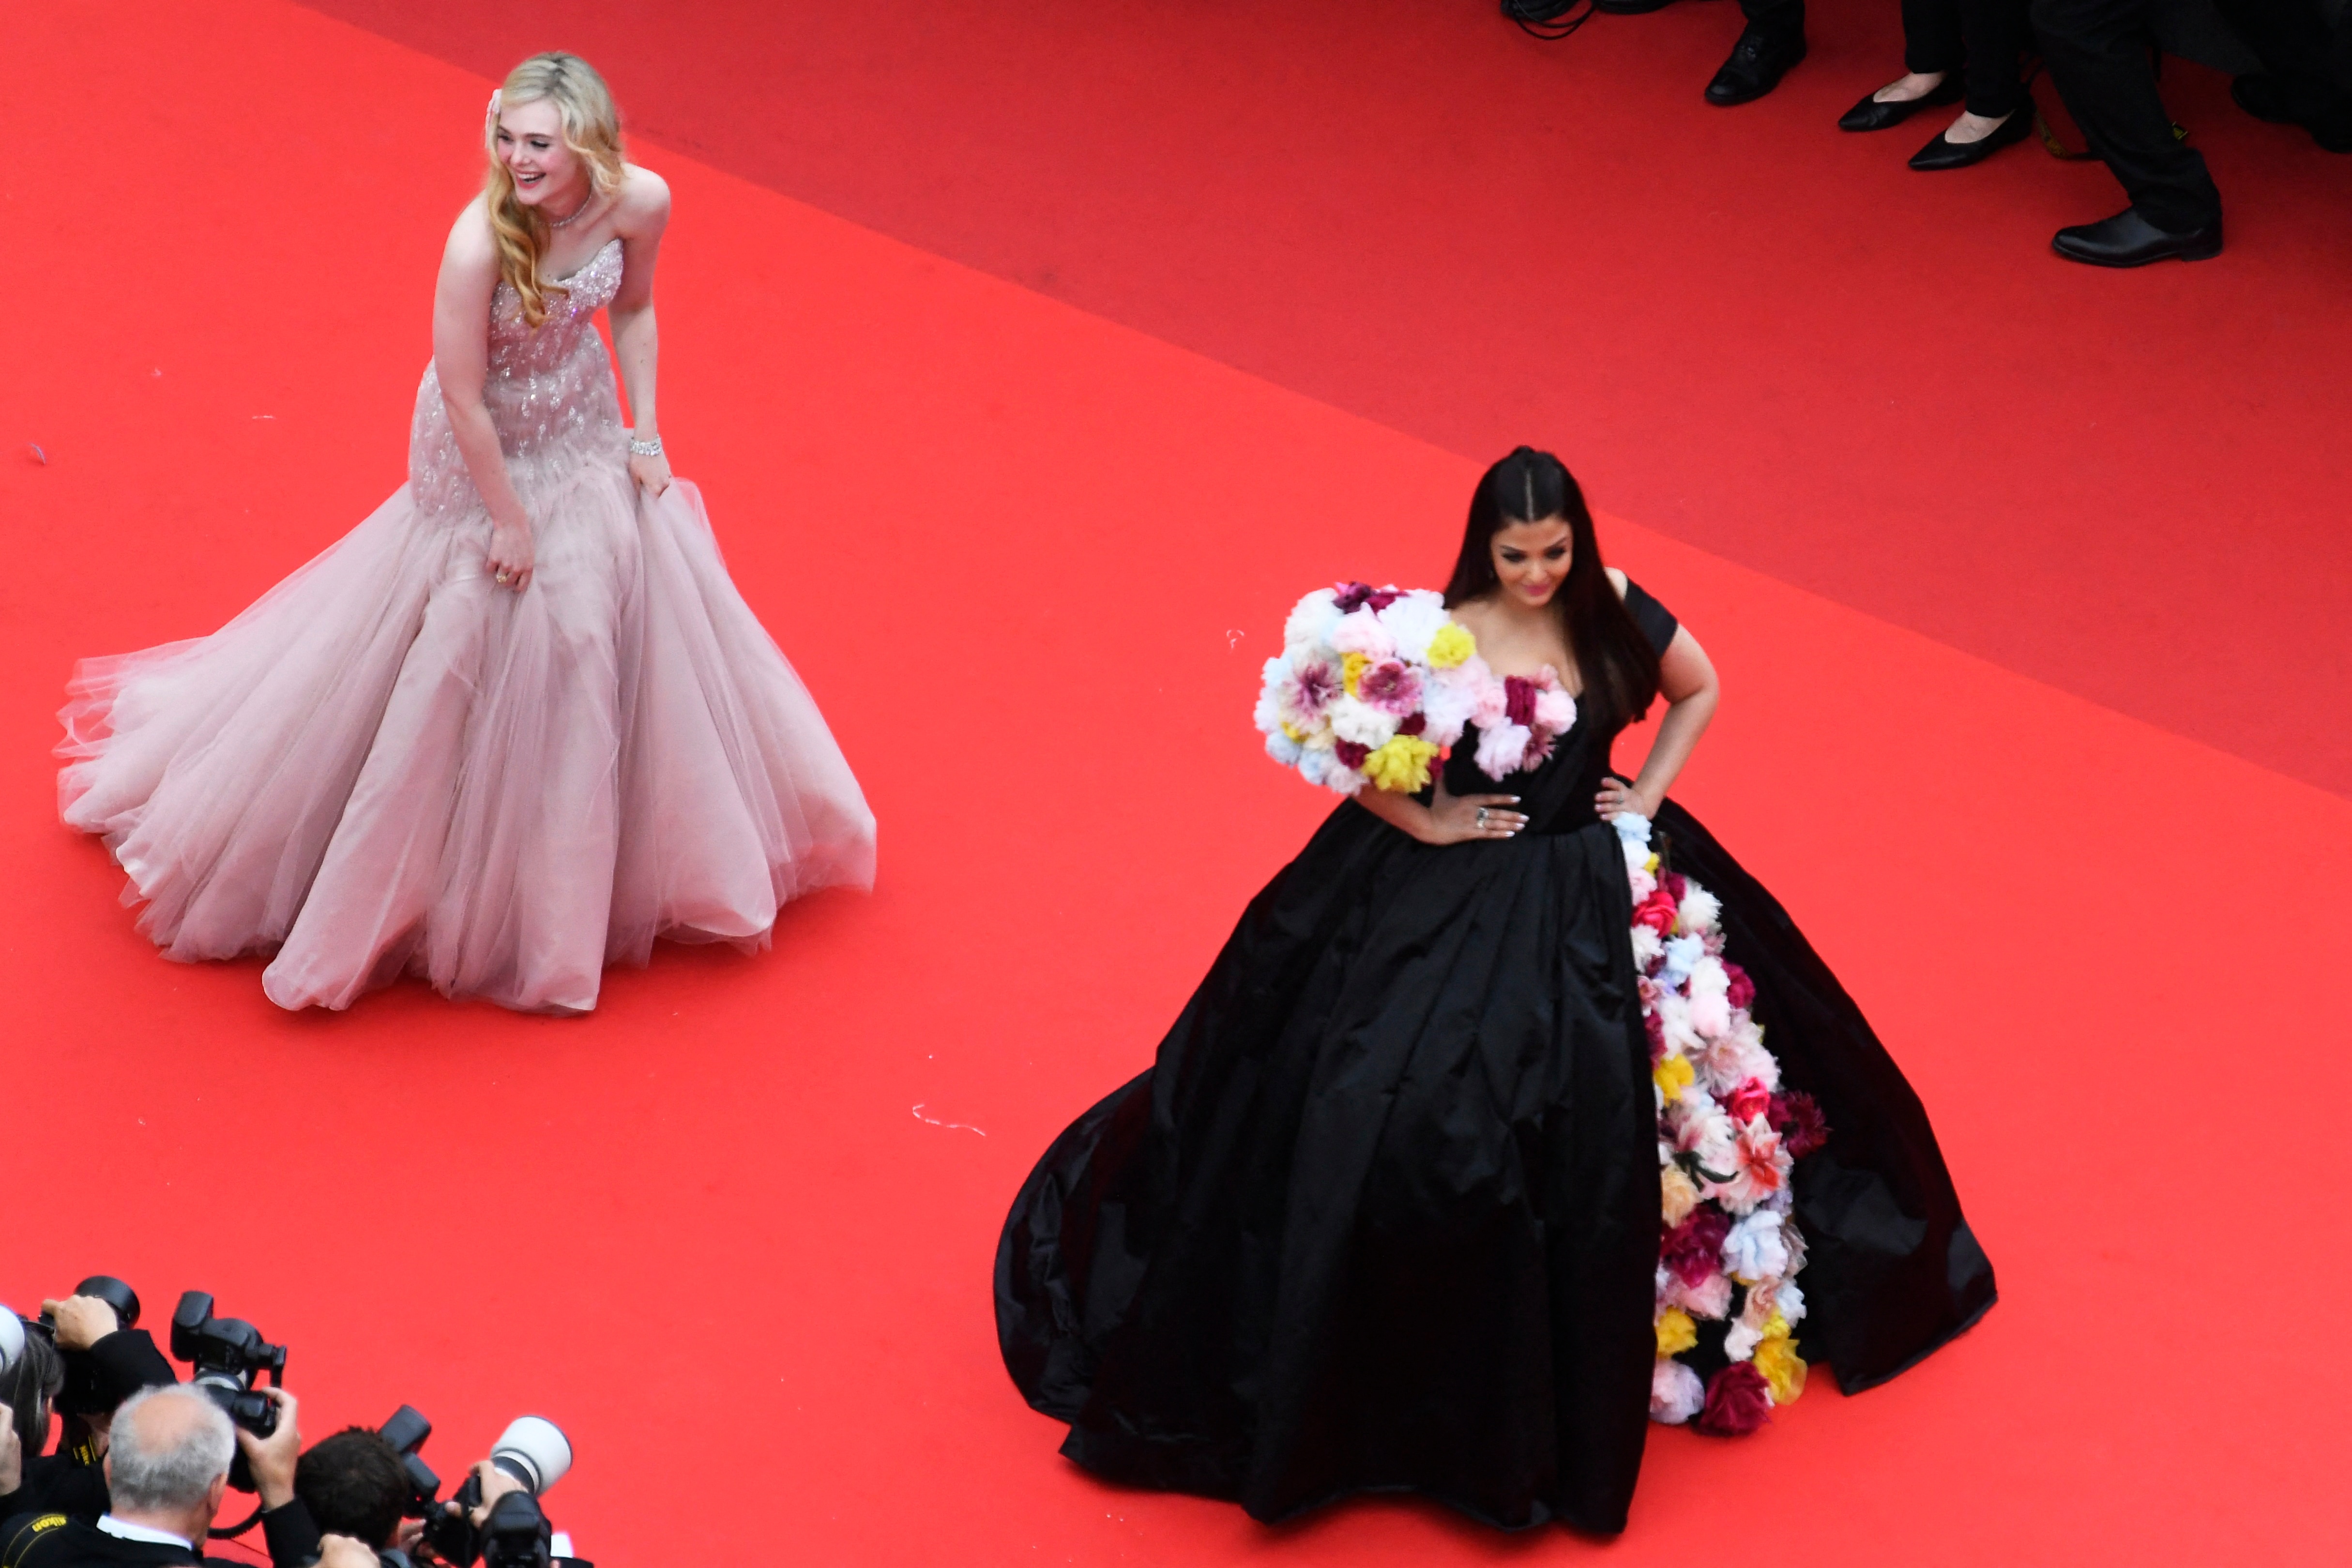 The 75th Cannes Film Festival - Screening of the film "Top Gun: Maverick" Out of Competition - Red Carpet Arrivals - Cannes, France, May 18, 2022. Aishwarya Rai and Elle Fanning pose. REUTERS/Piroschka Van De Wouw(REUTERS)